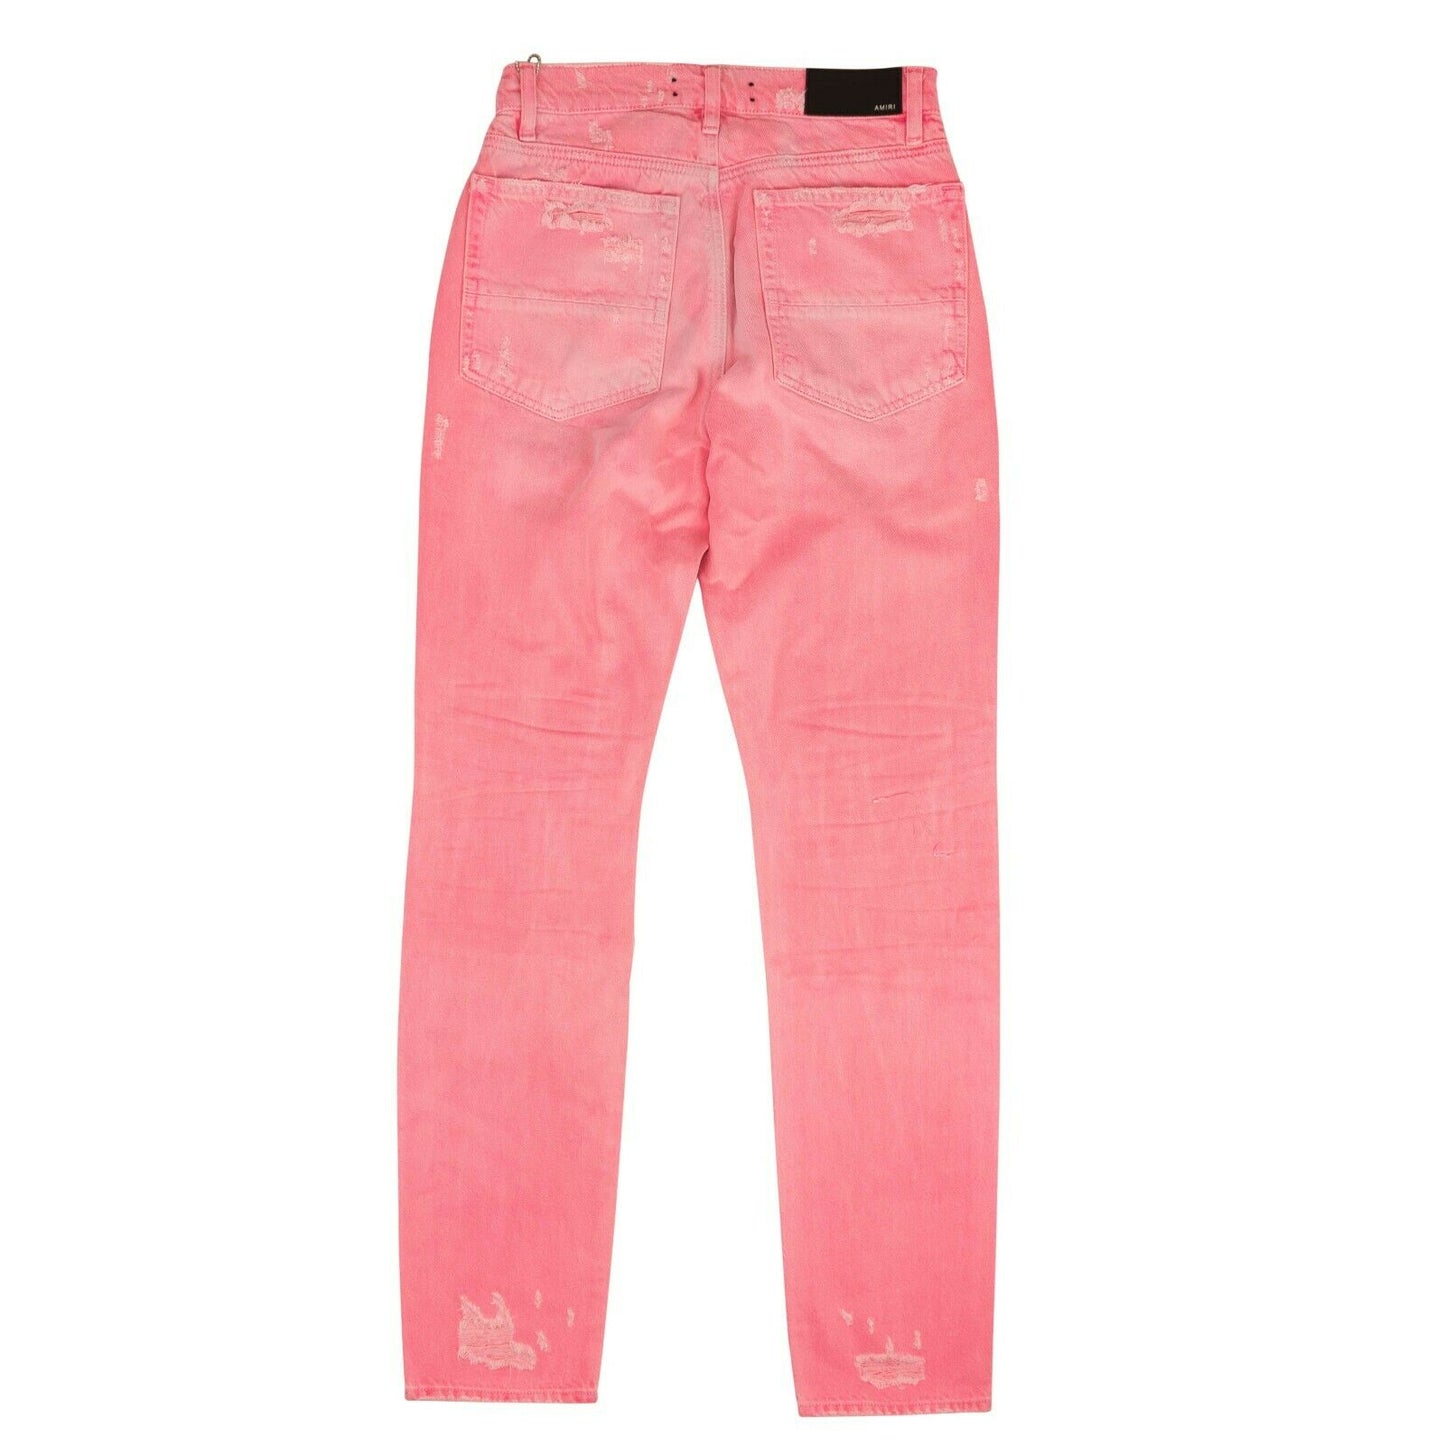 Amiri Slouch Destroyed Jean - Neon Pink